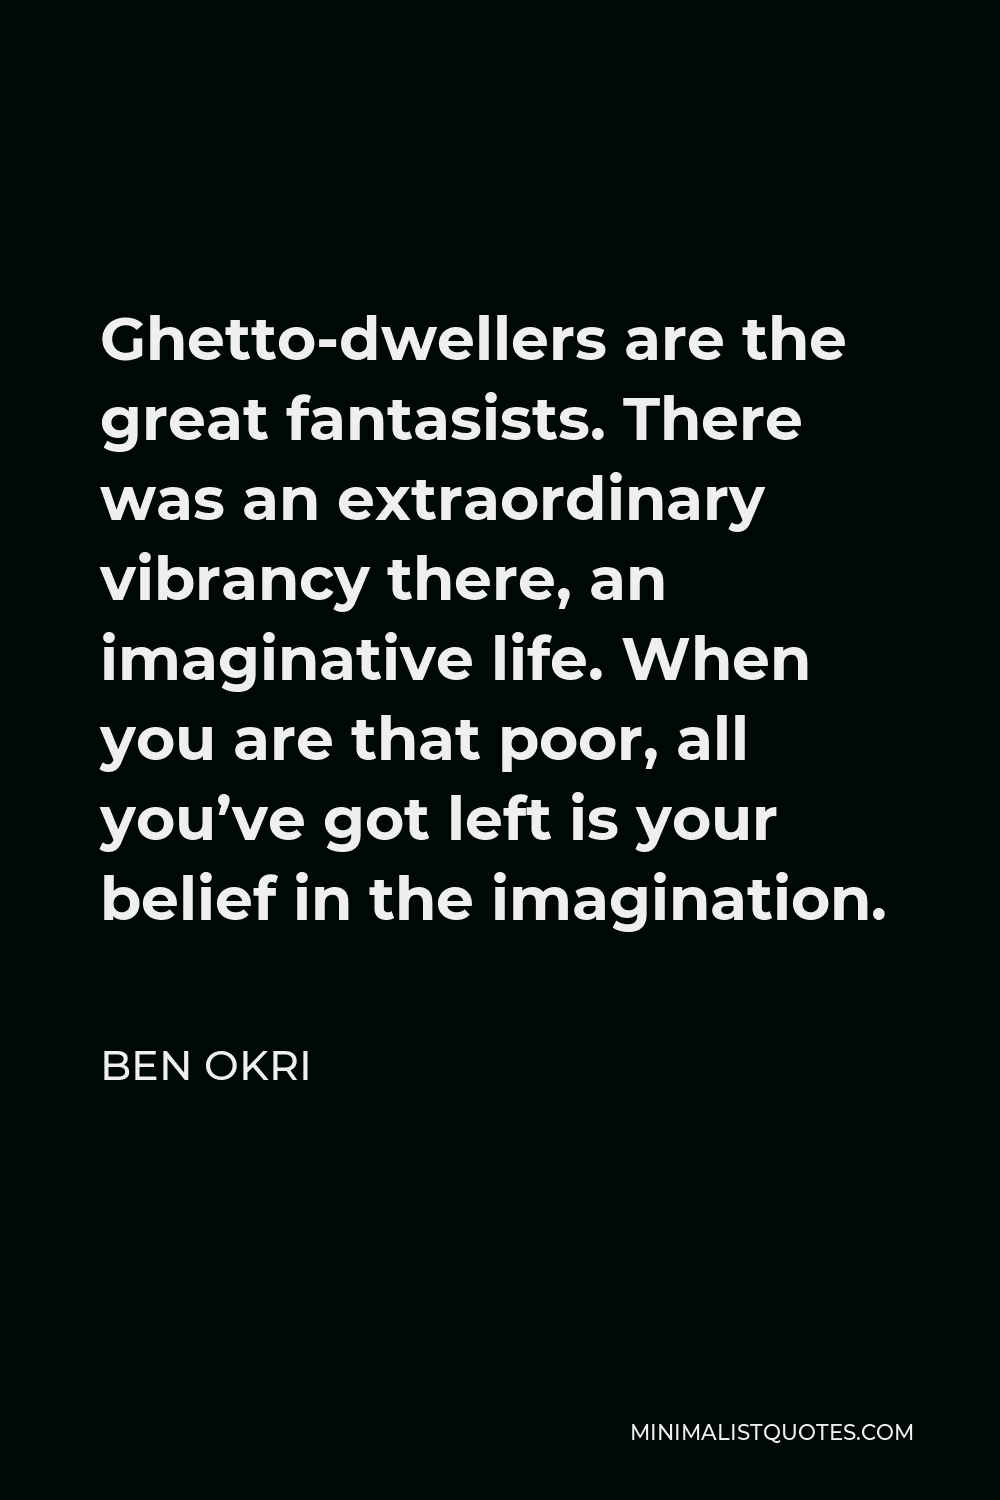 Ben Okri Quote - Ghetto-dwellers are the great fantasists. There was an extraordinary vibrancy there, an imaginative life. When you are that poor, all you’ve got left is your belief in the imagination.